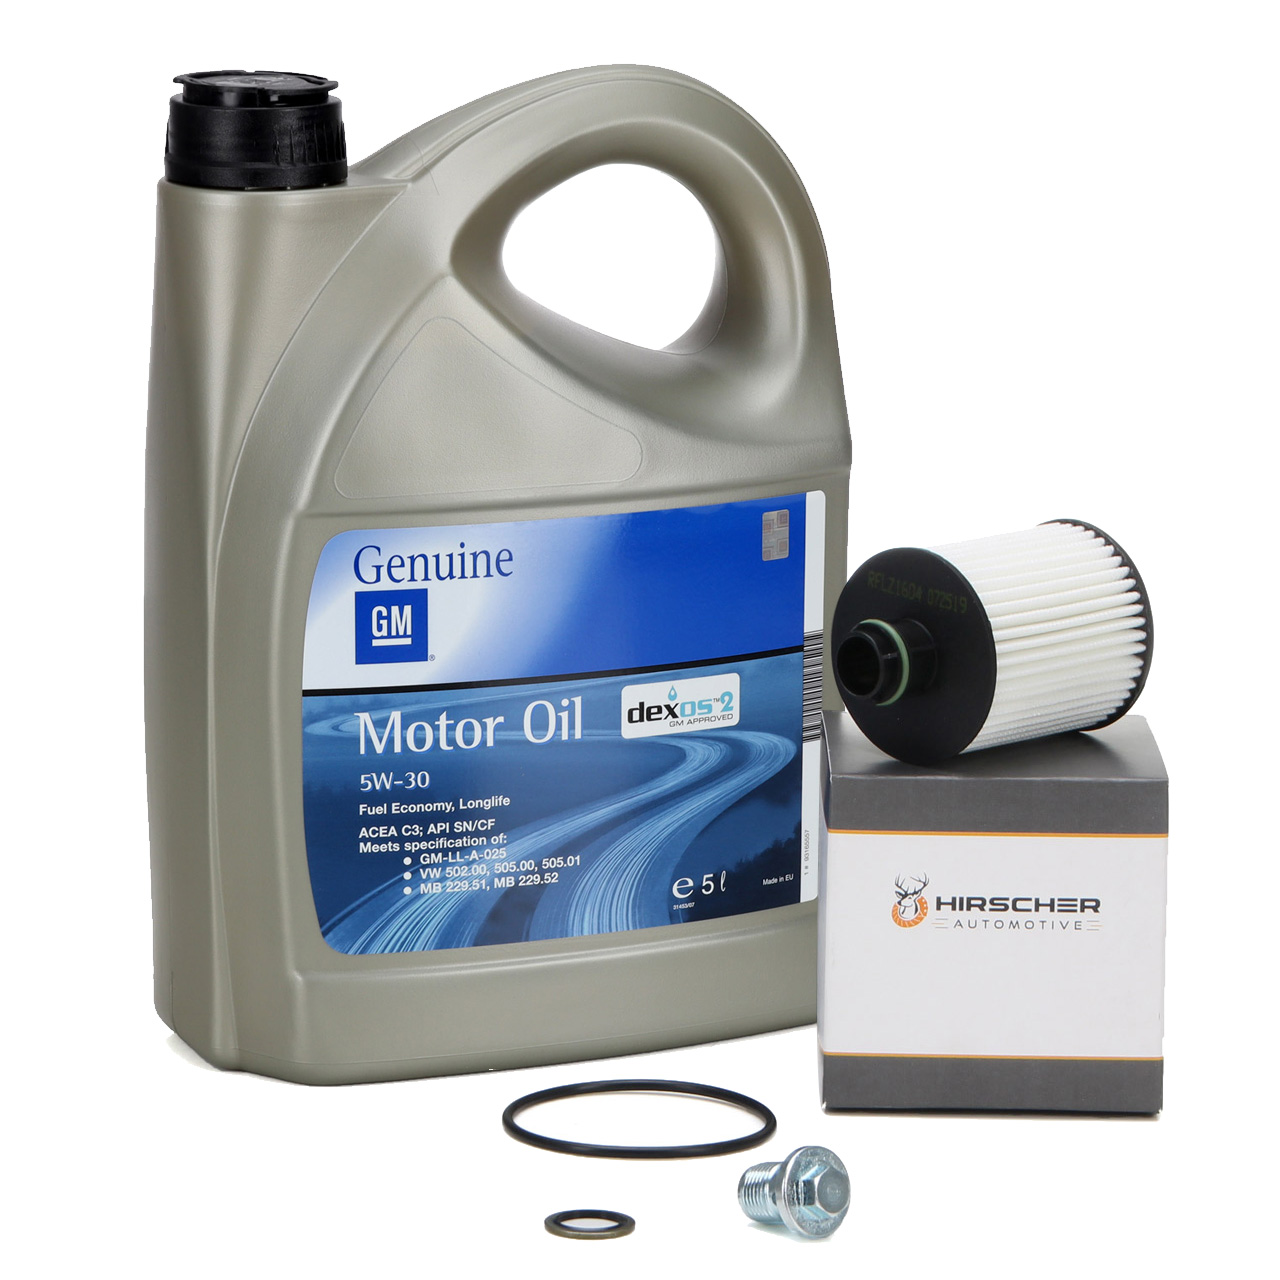 Engine oil dexos 2 for Opel - Oil with GM approval